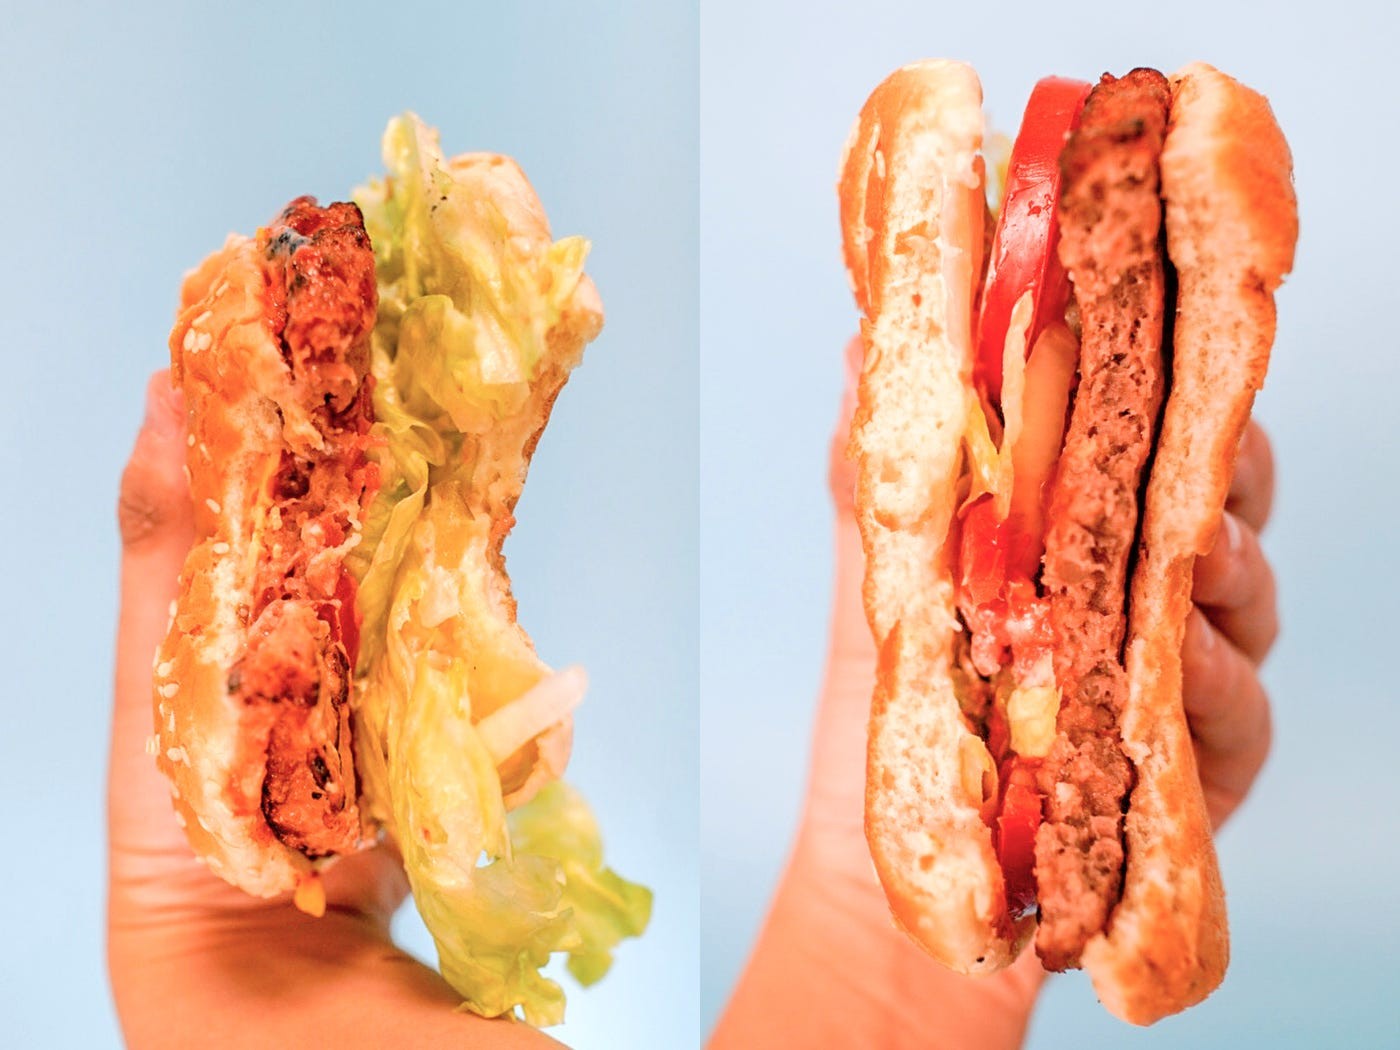 Burger King, White Castle and Carl’s Jr. all have meatless, plant-based burgers. Do they hold up against real beef patties? Photo: Joey Hadden/Business Insider